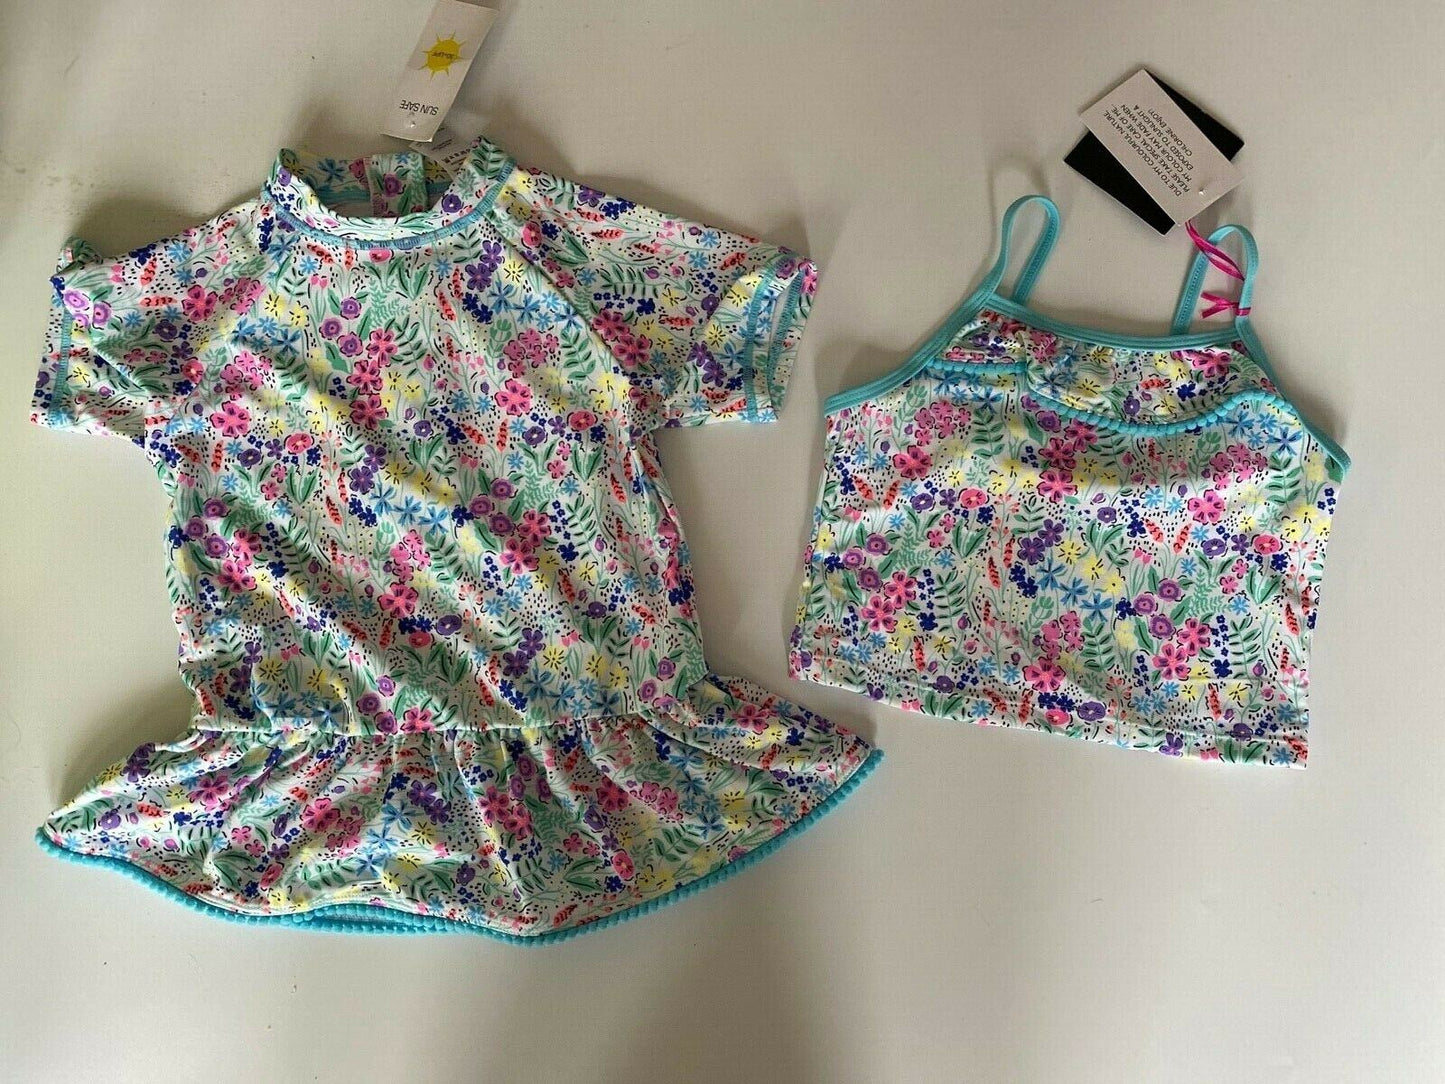 Girls VERY Neon Floral Sunsafe x2 Swimwear Tops Age 4-5 Bottoms are missing